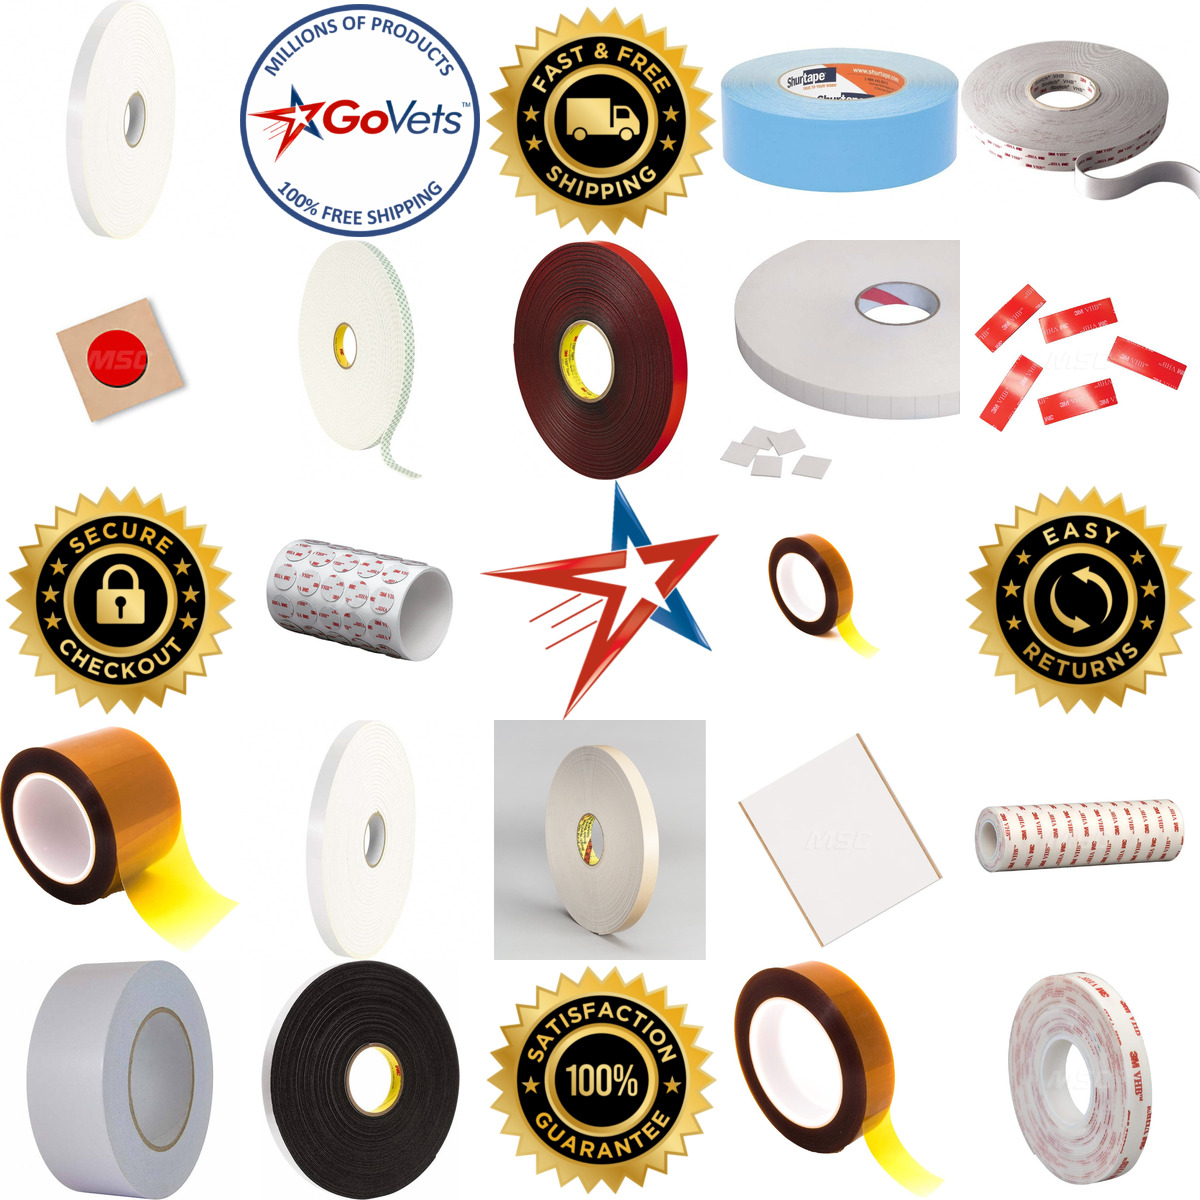 A selection of Double Sided Tape products on GoVets